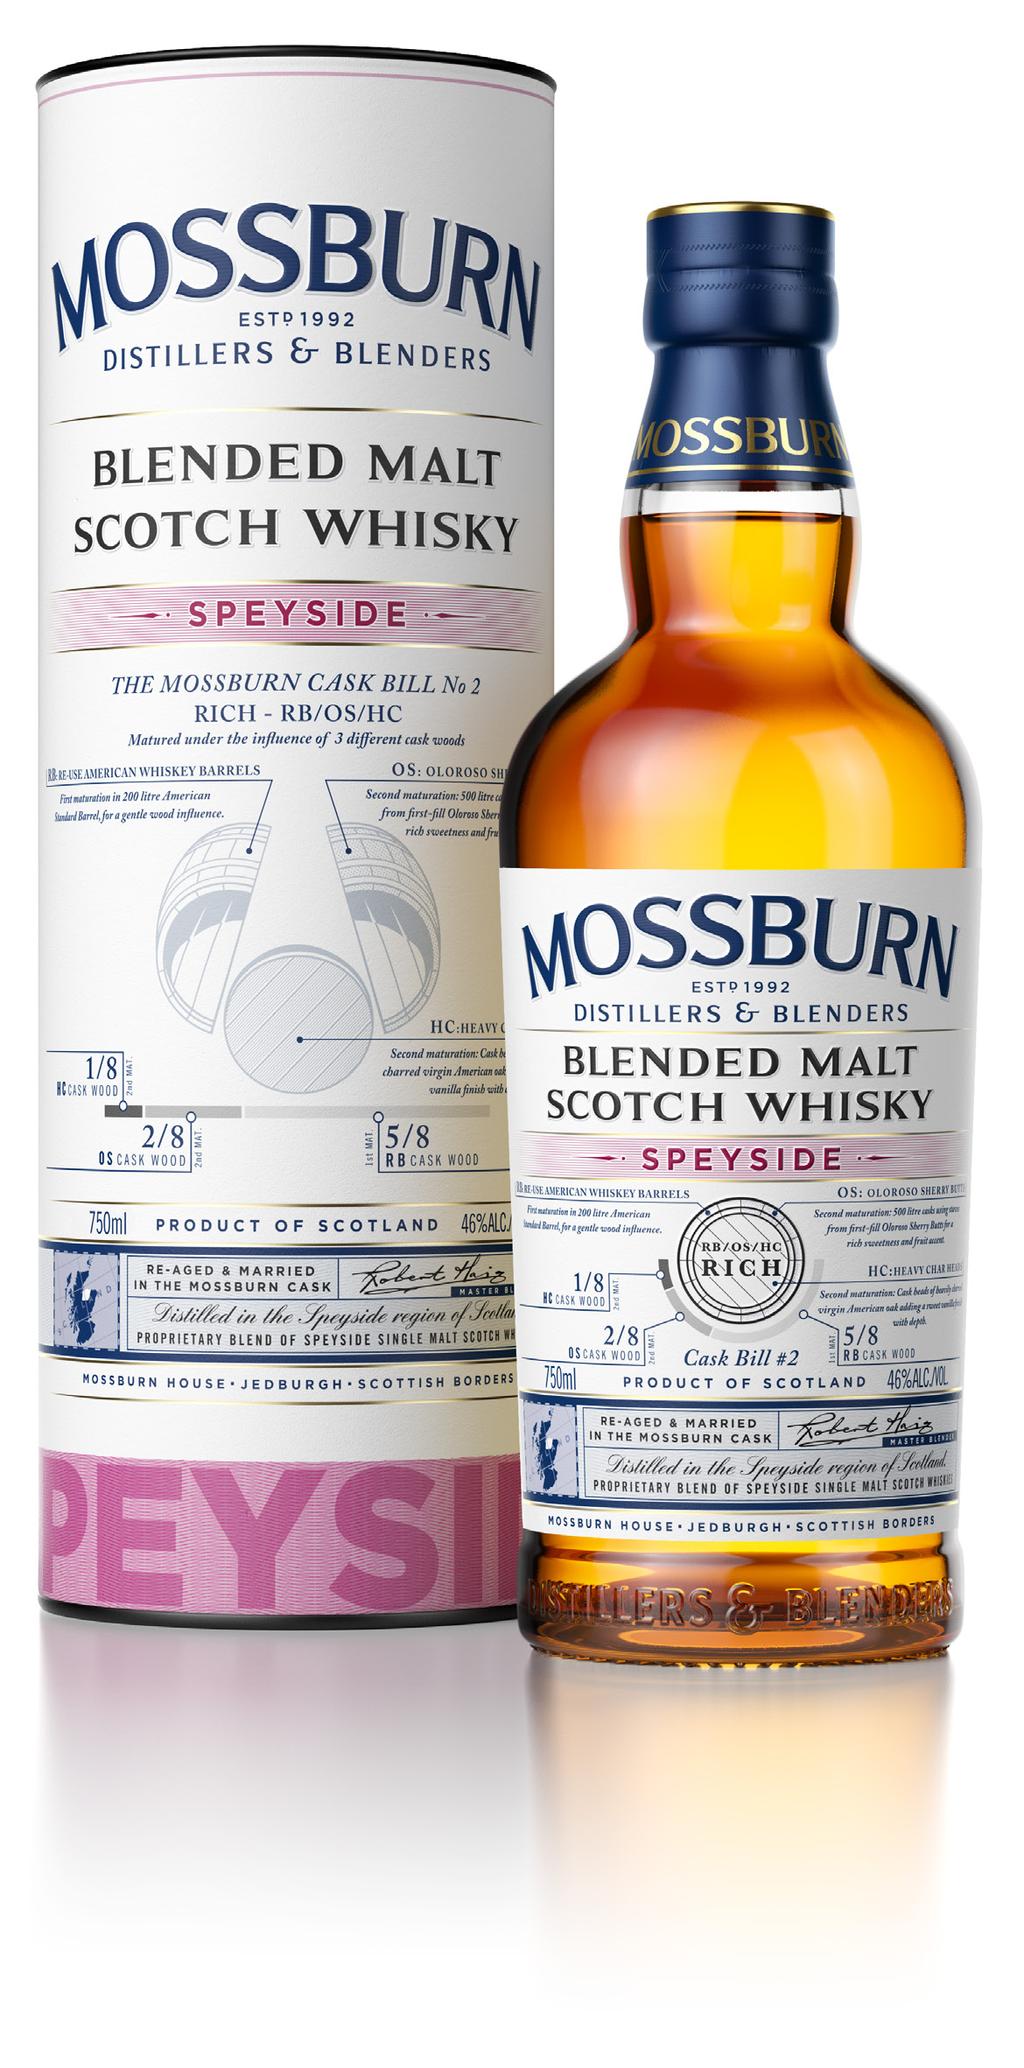 RICH - RB/OS/HC - Matured under the influence of 3 different cask woods: RB (Re-use American Whisky Barrels) / OS (Oloroso Sherry Butts) / HC (Heavy Char Heads) The Mossburn Signature Casks range of